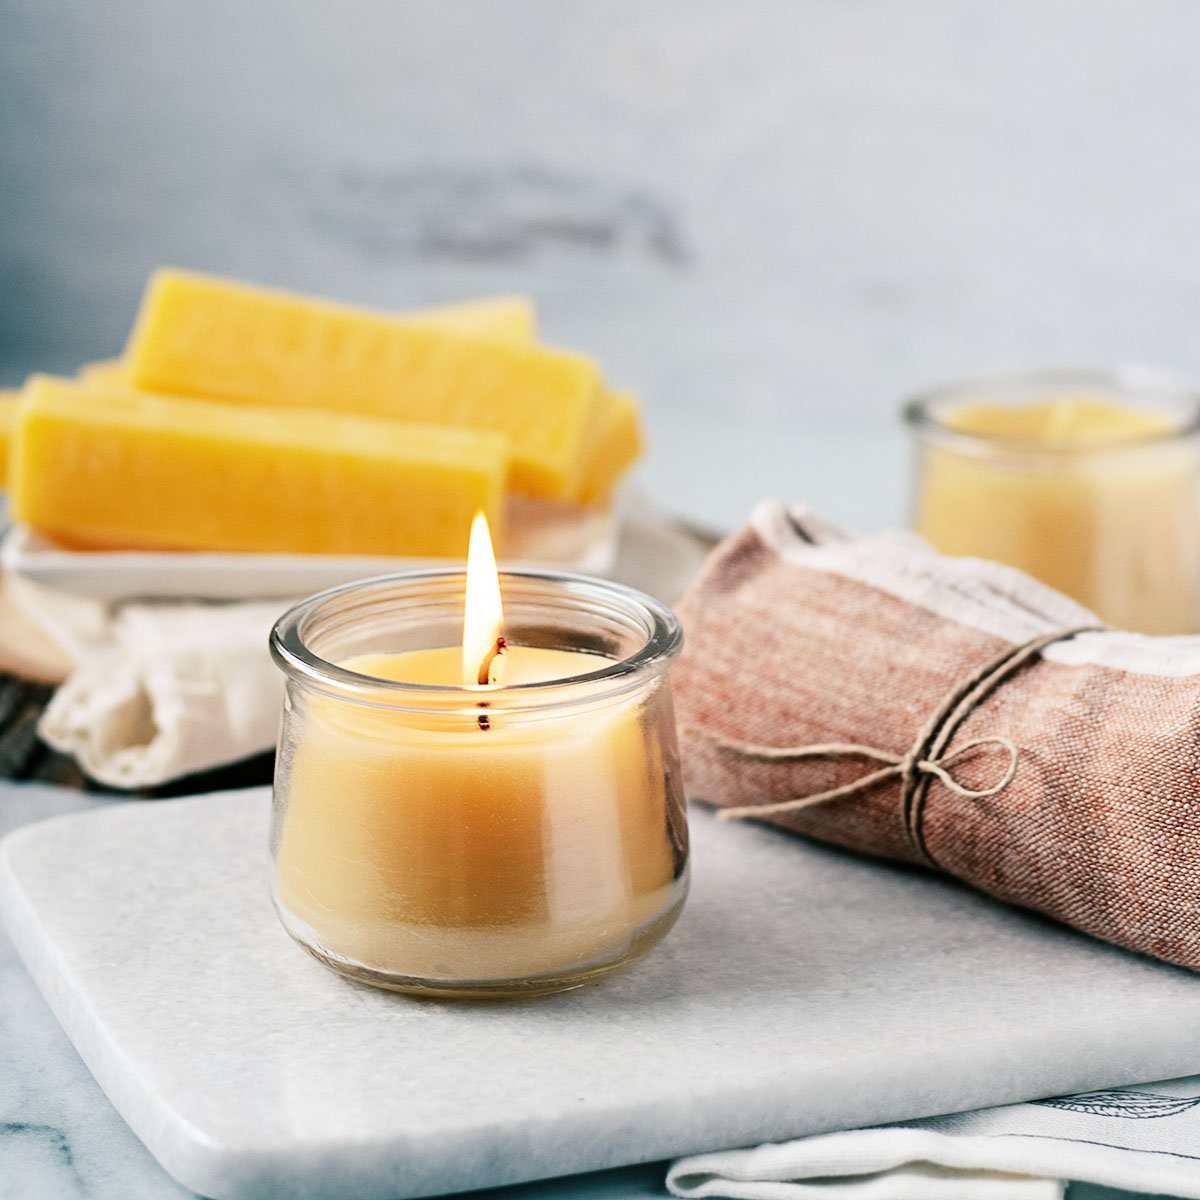 How to Make Scented Beeswax Candles with Essential Oils